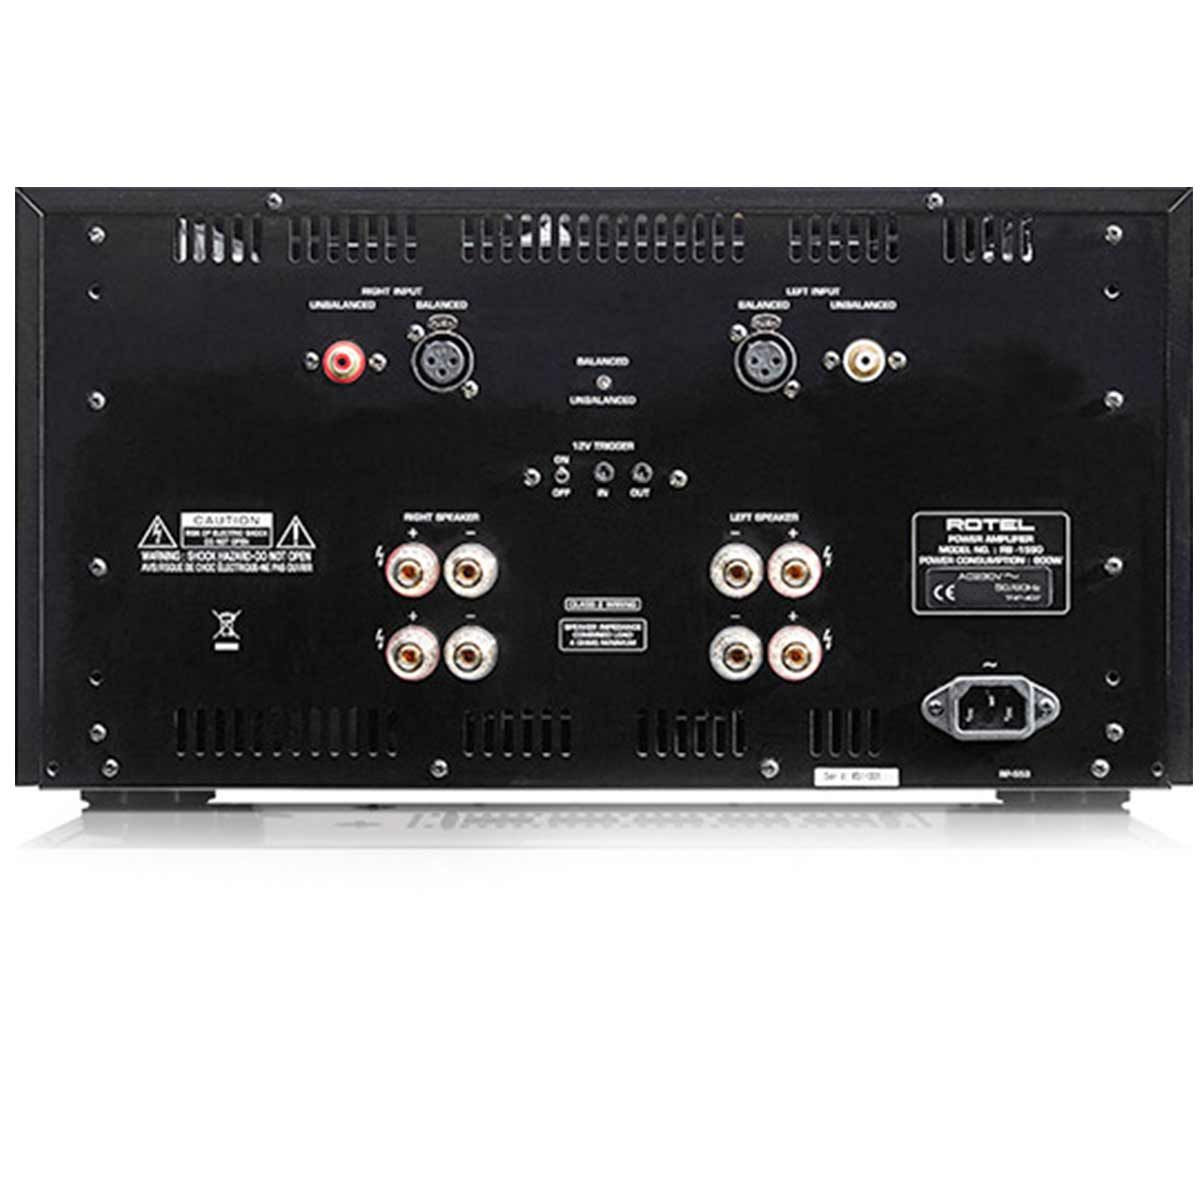 Back view Rotel RB-1590 Stereo Class A/B Power Amplifier - Black